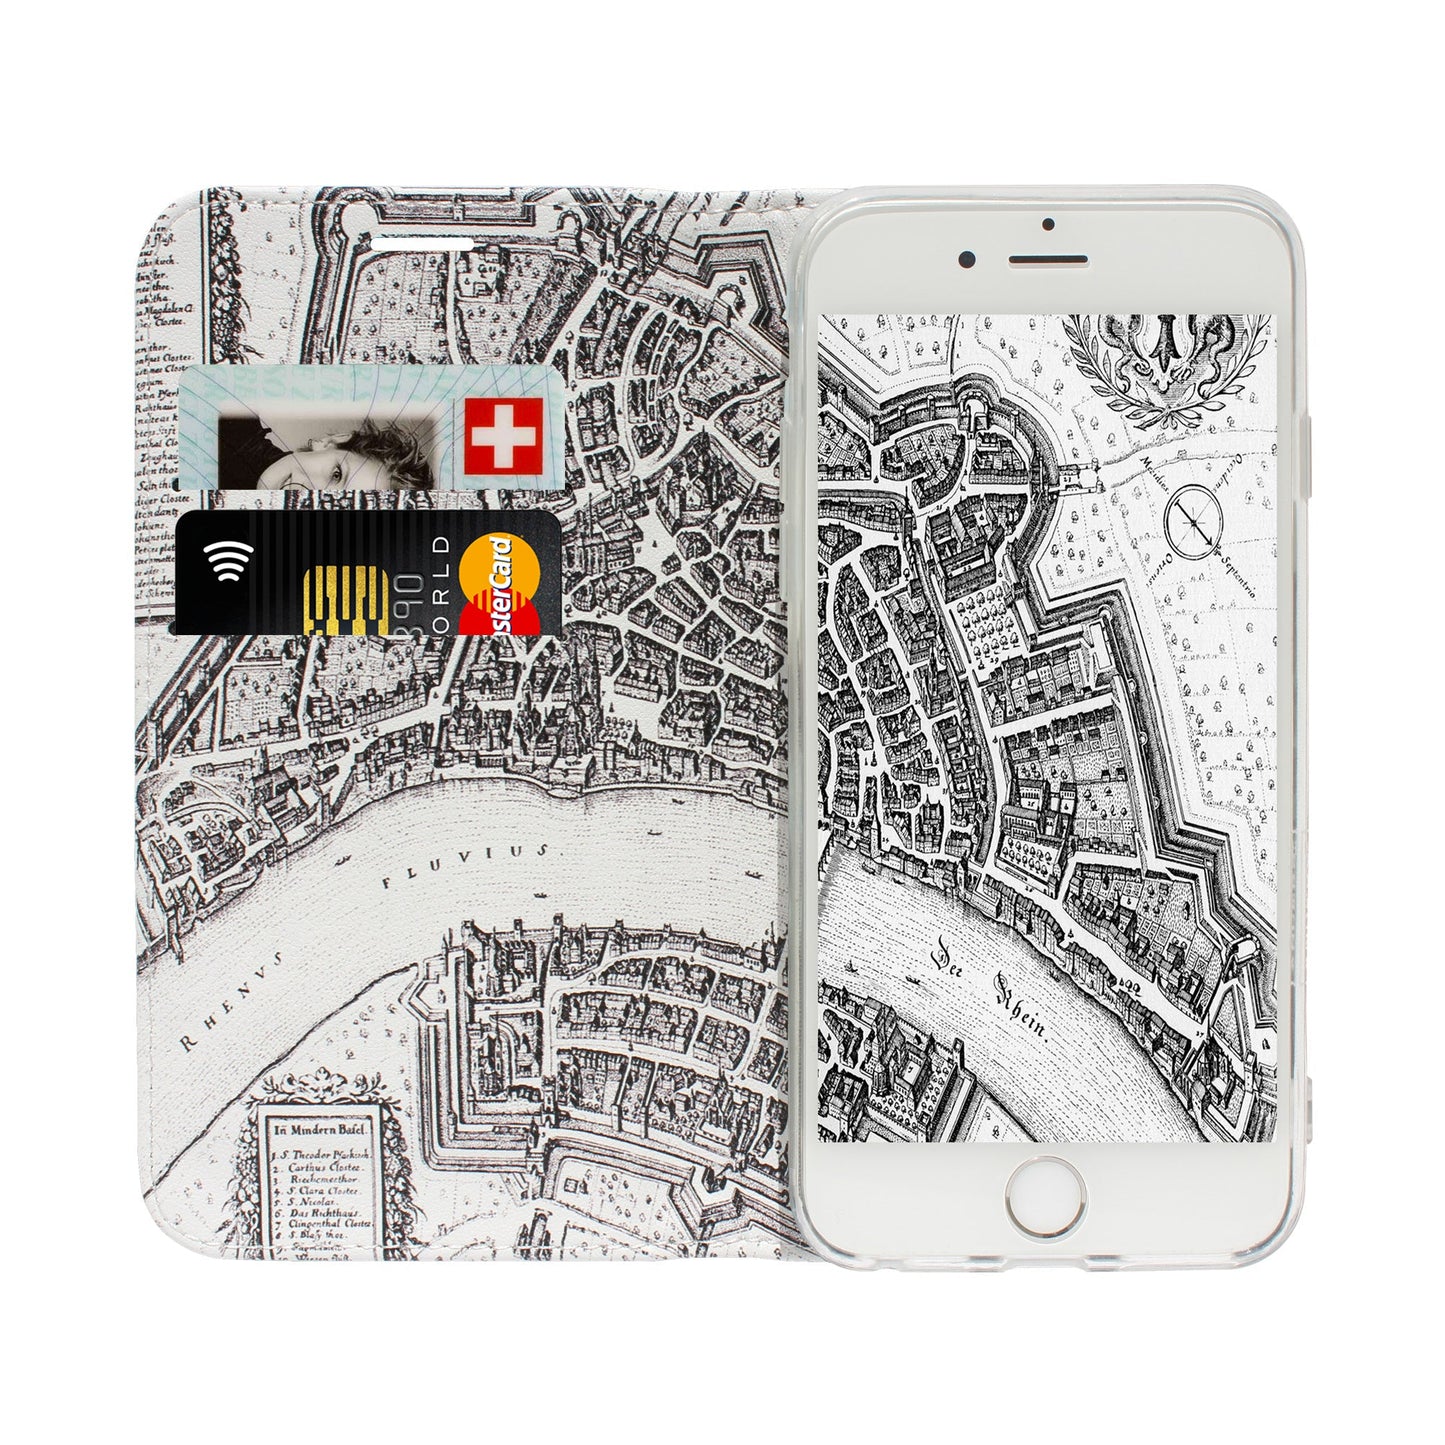 Basel Merian panorama case for iPhone 5/5S/SE 1